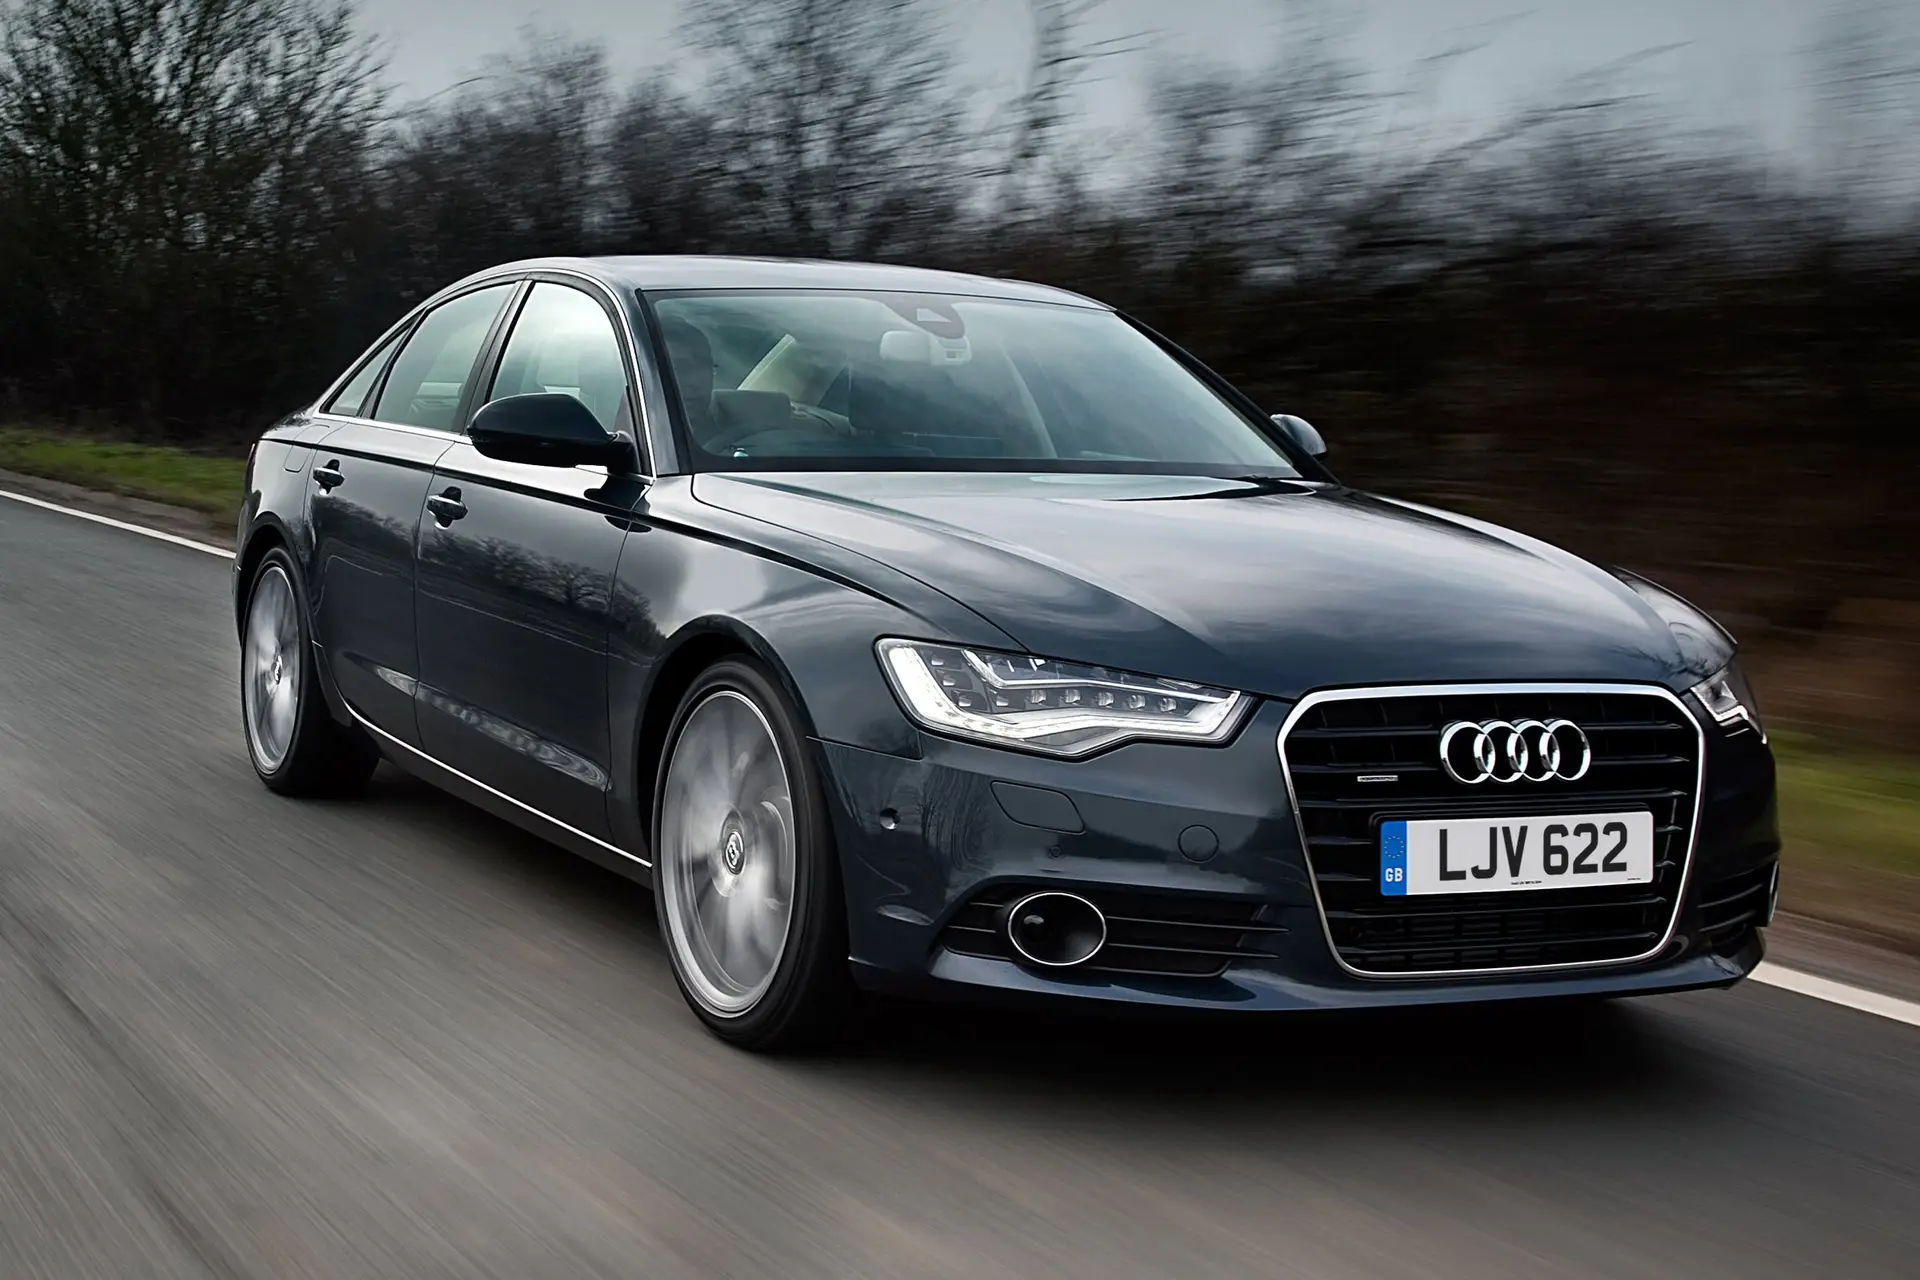 Used Audi A6 (2011-2018) Review: Exterior front three quarter photo of the Audi A6 on the road 